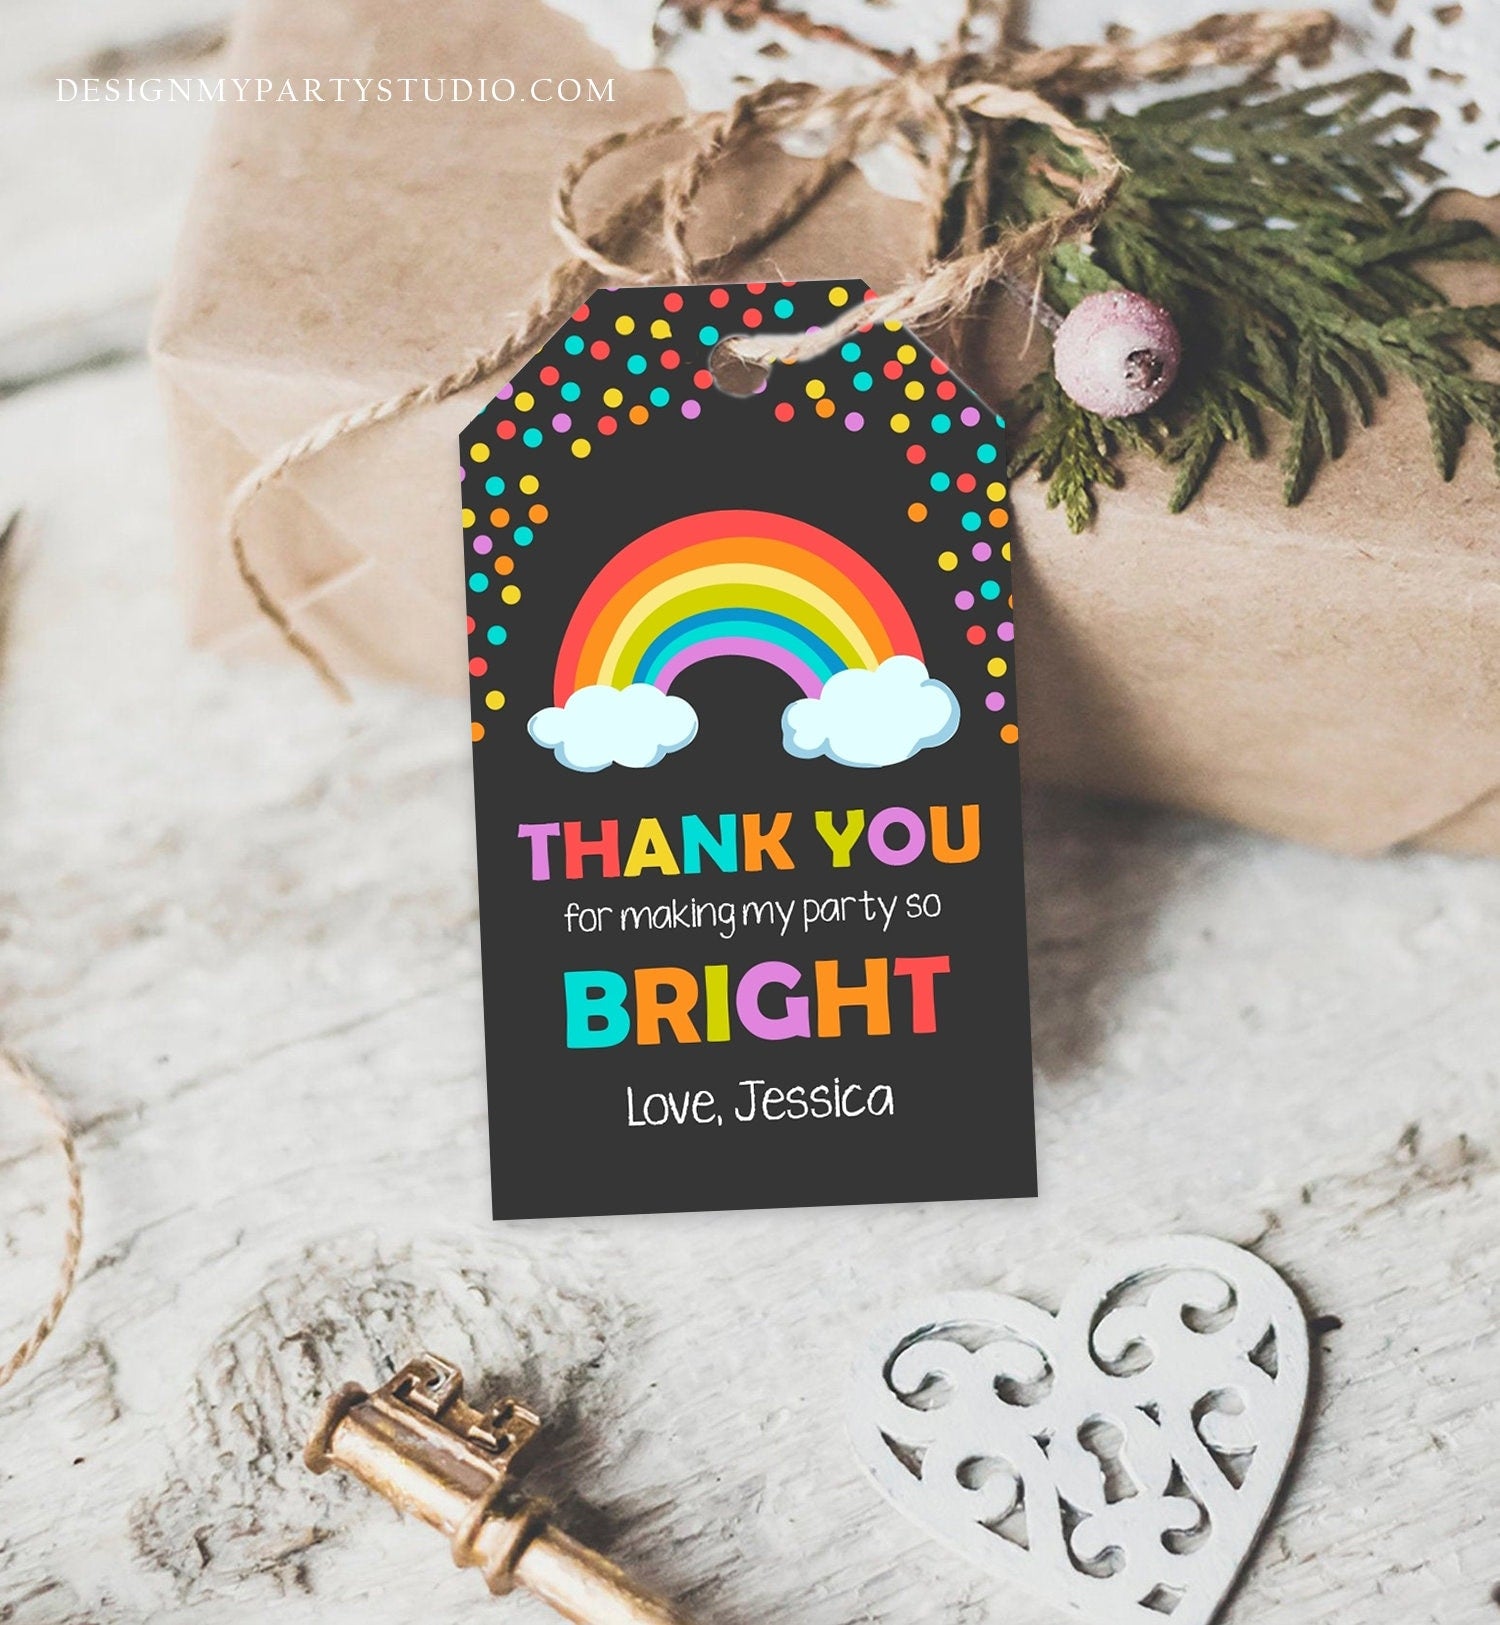 Rainbow Favor Tags, Rainbow Gift Tags, Rainbow Party Decorations, Rainbow  Birthday Party Instant Download PDF Printable 